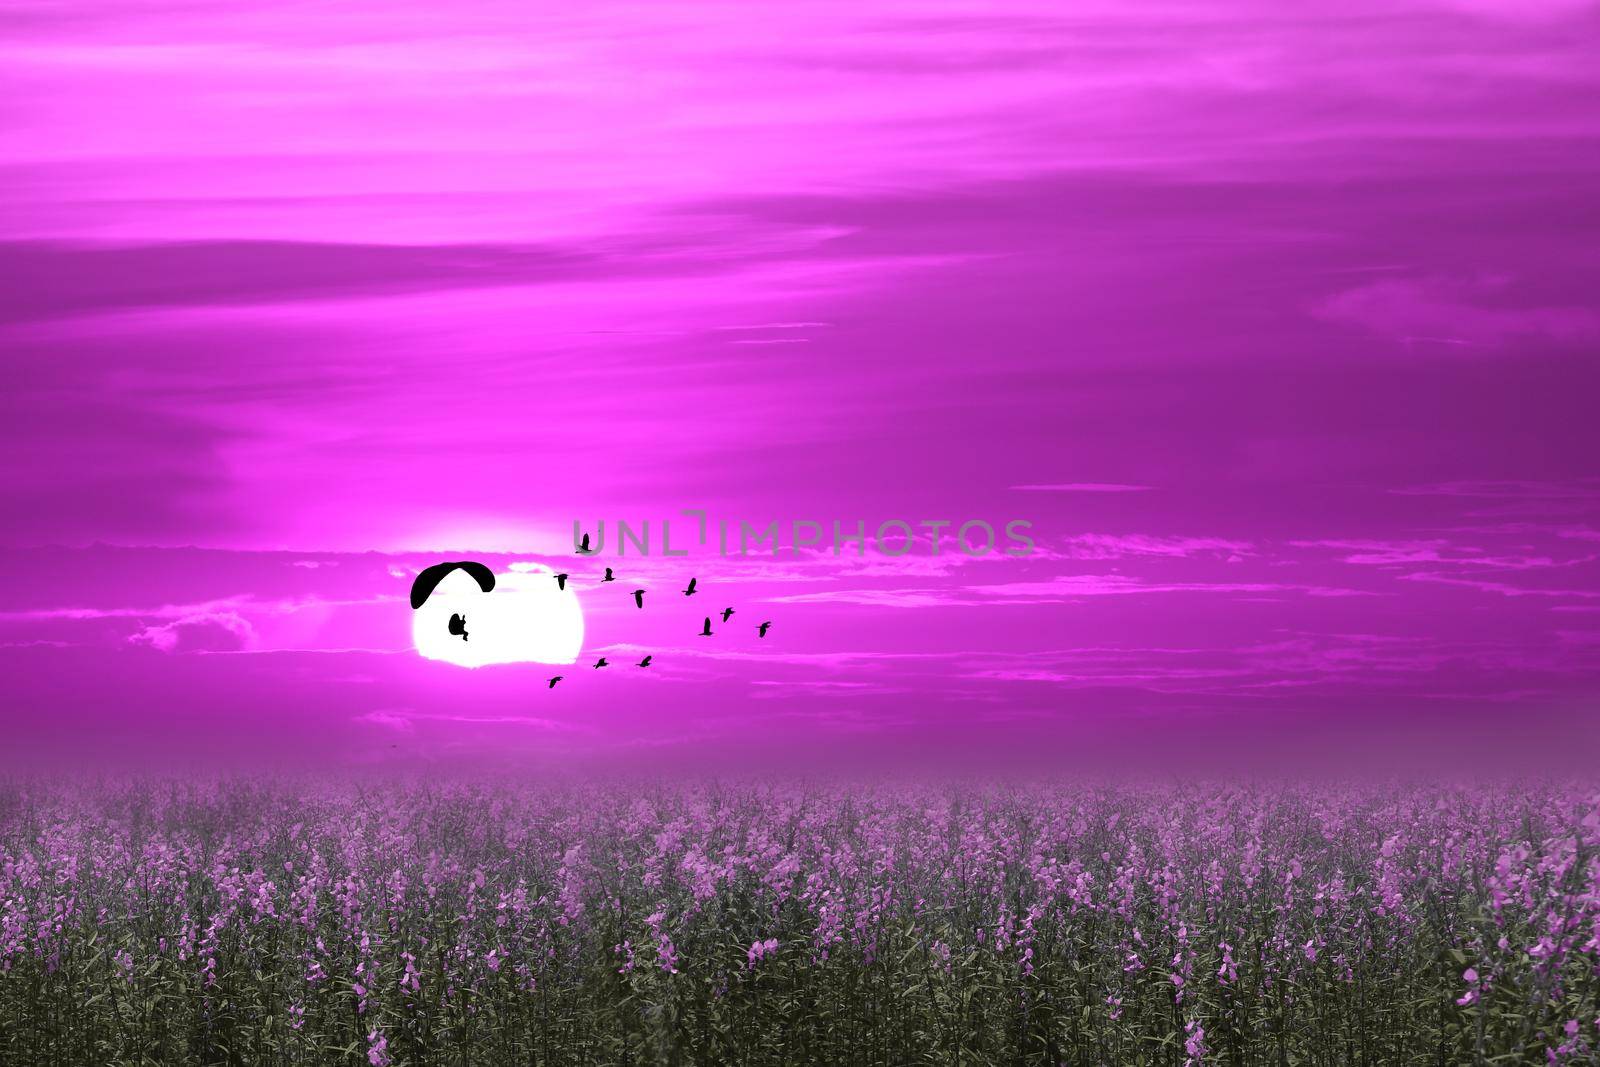 sunset flying bird and paramotor over french lavender field pink sky background